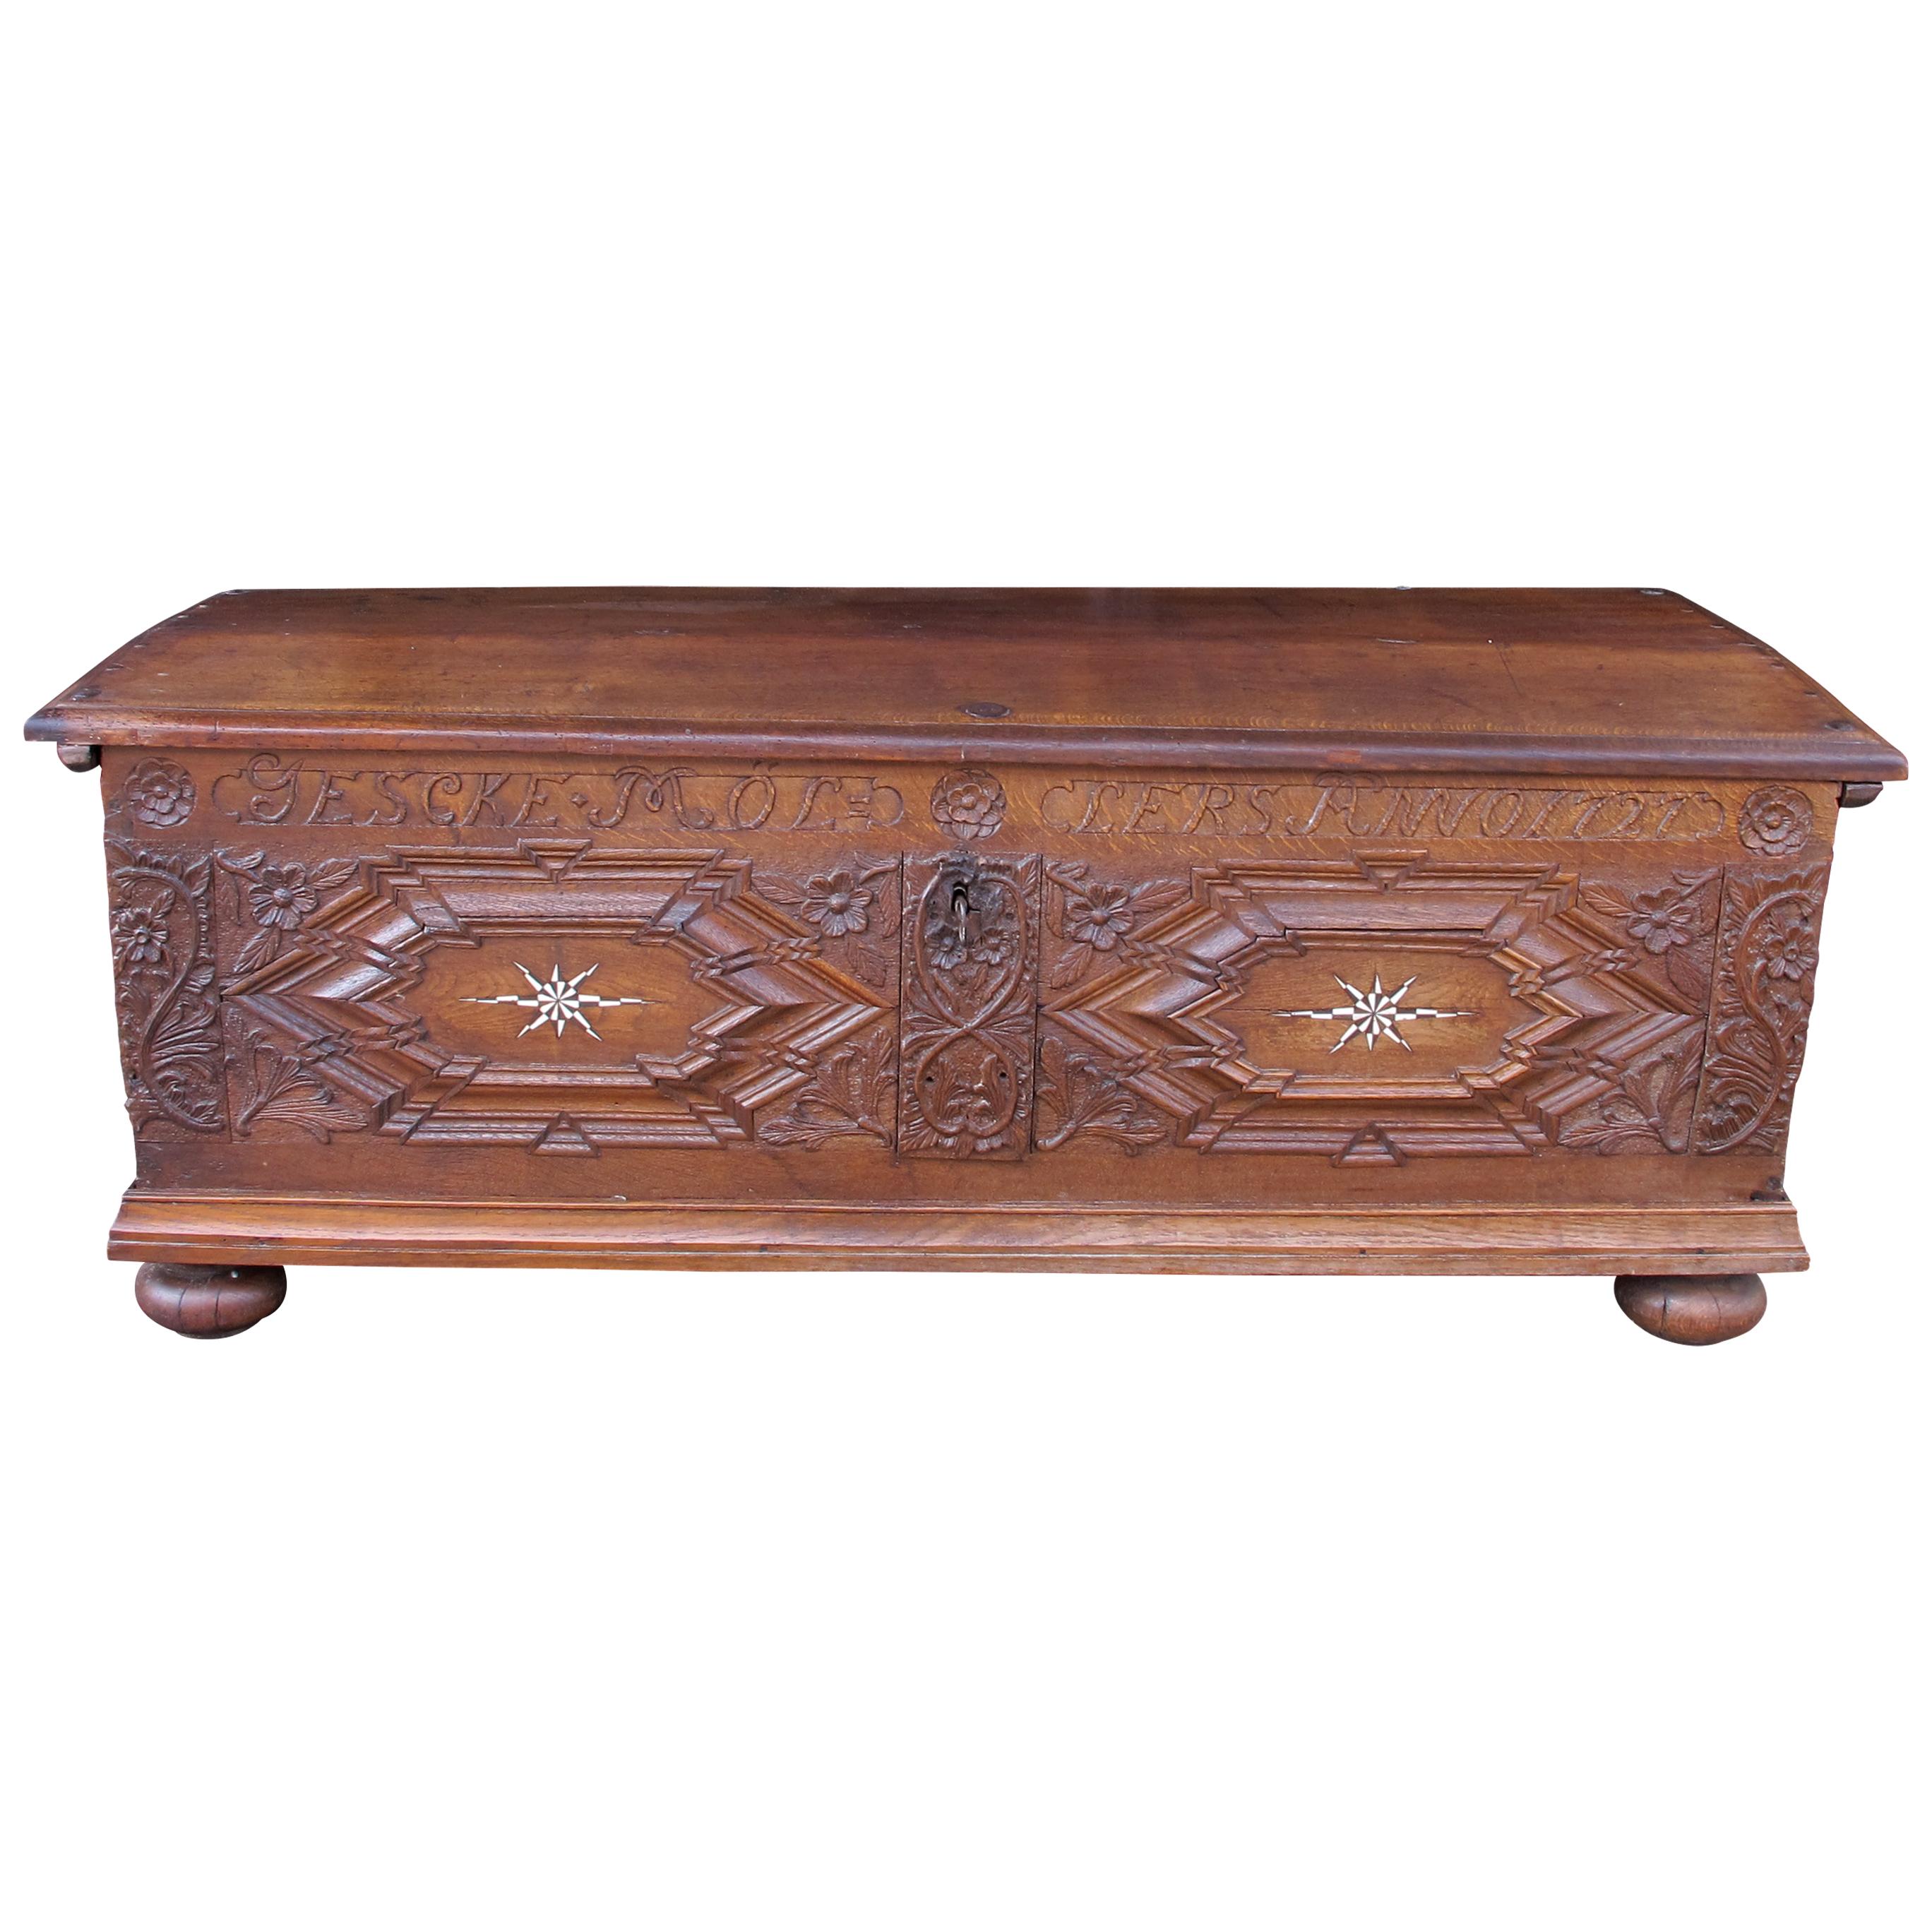 Baroque Early 18th Century Large Marriage Oak Trunk With a Vaulted Lid and Carvings For Sale